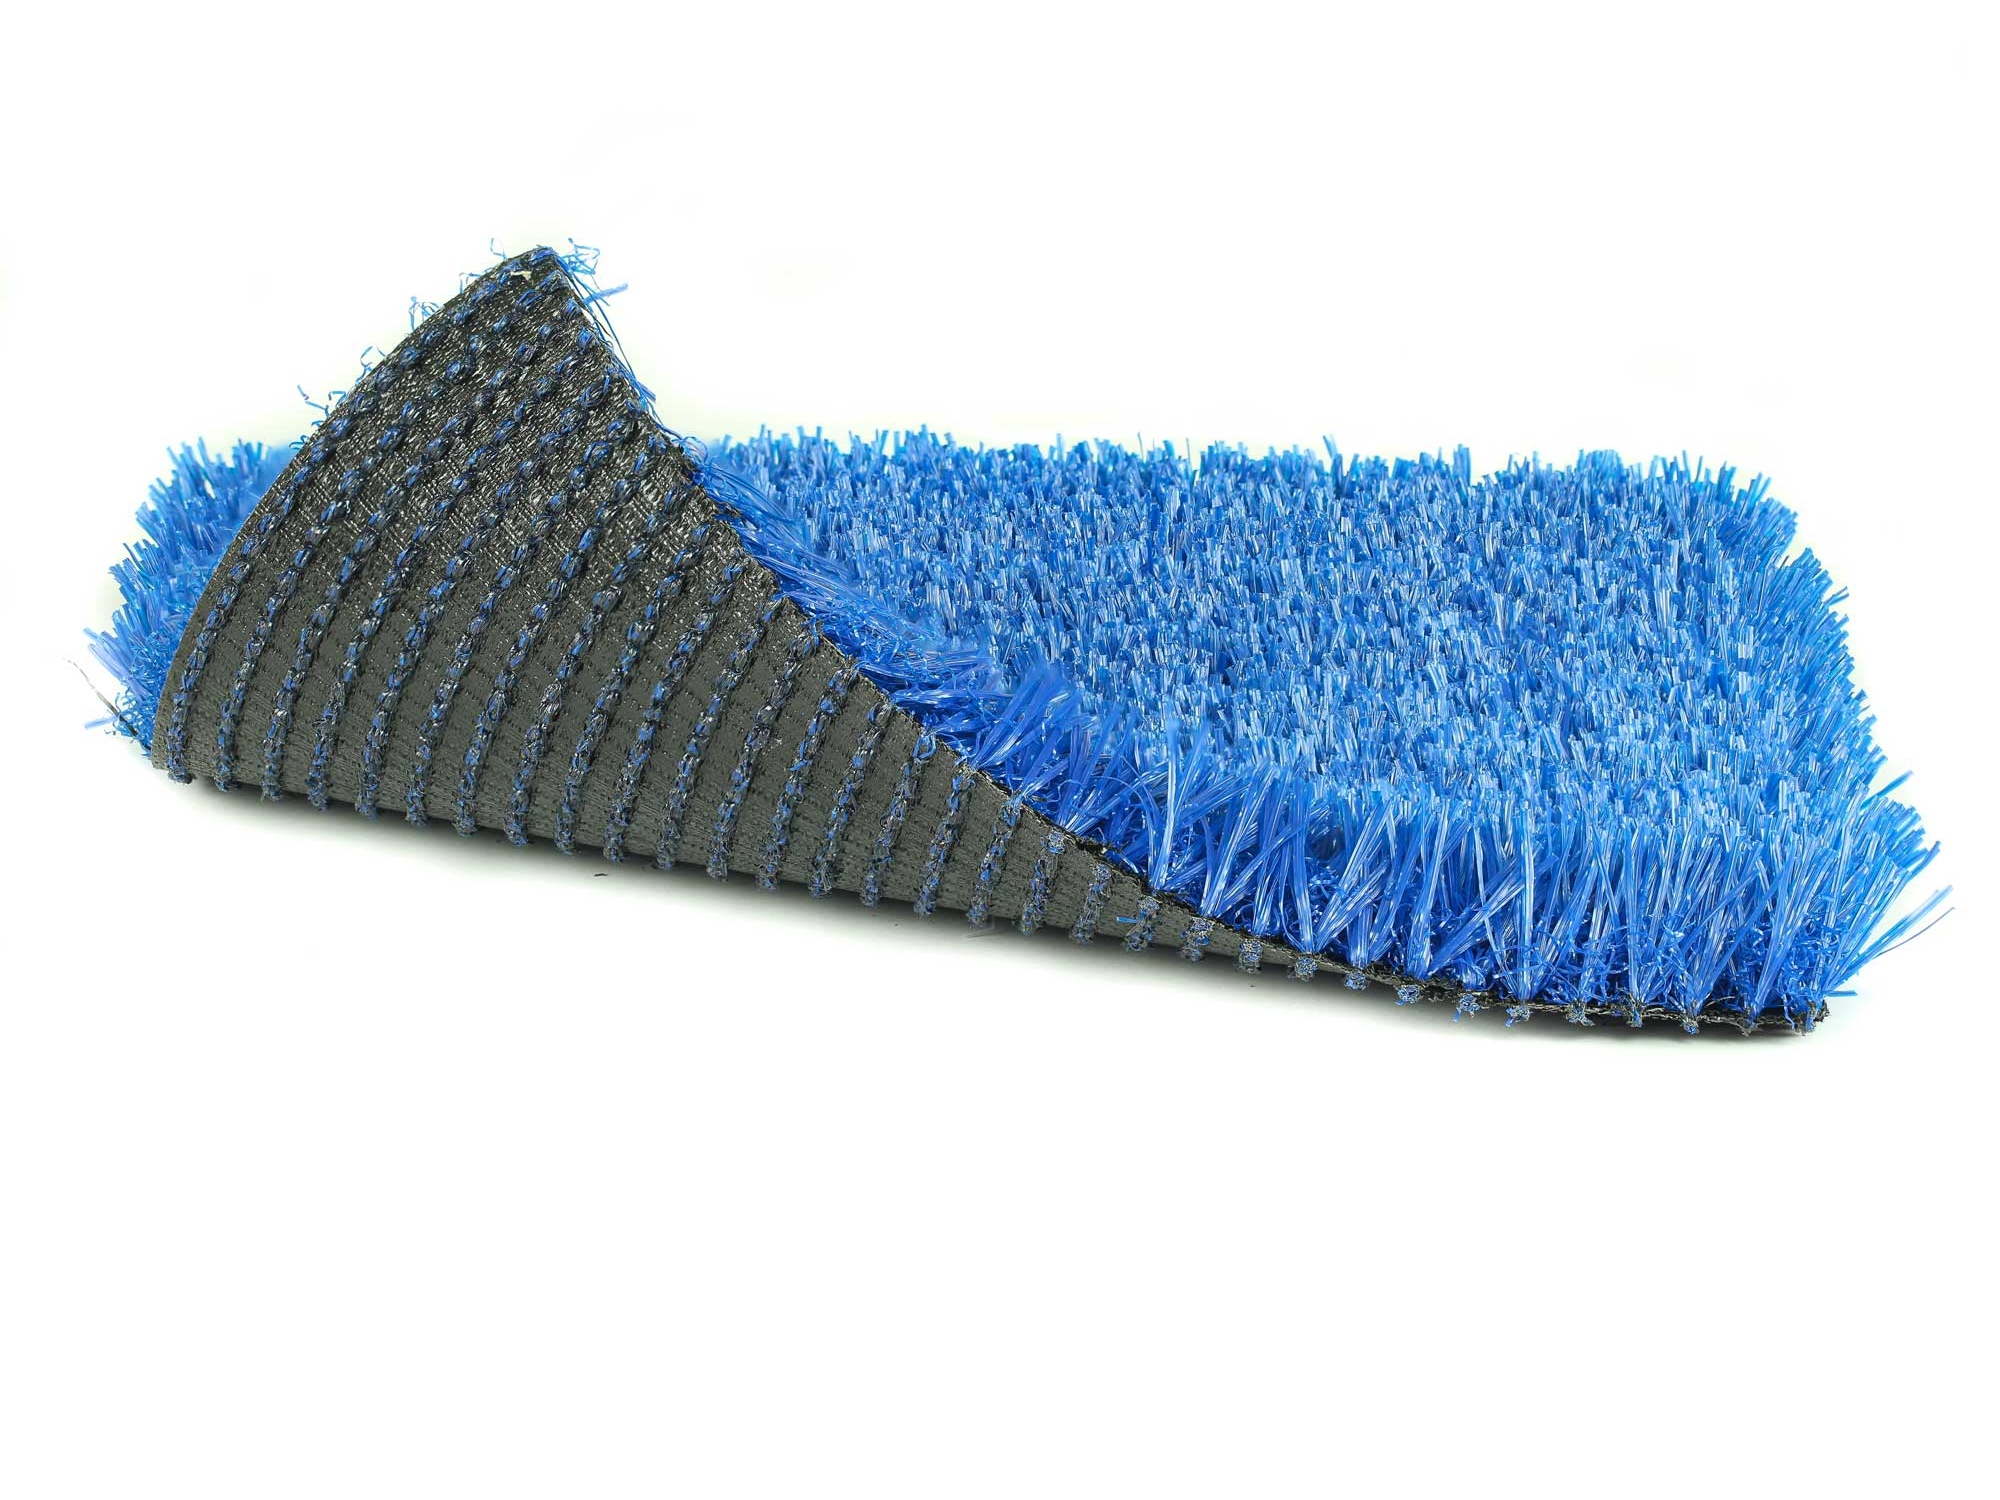 Trainers Turf Blue Artificial Grass